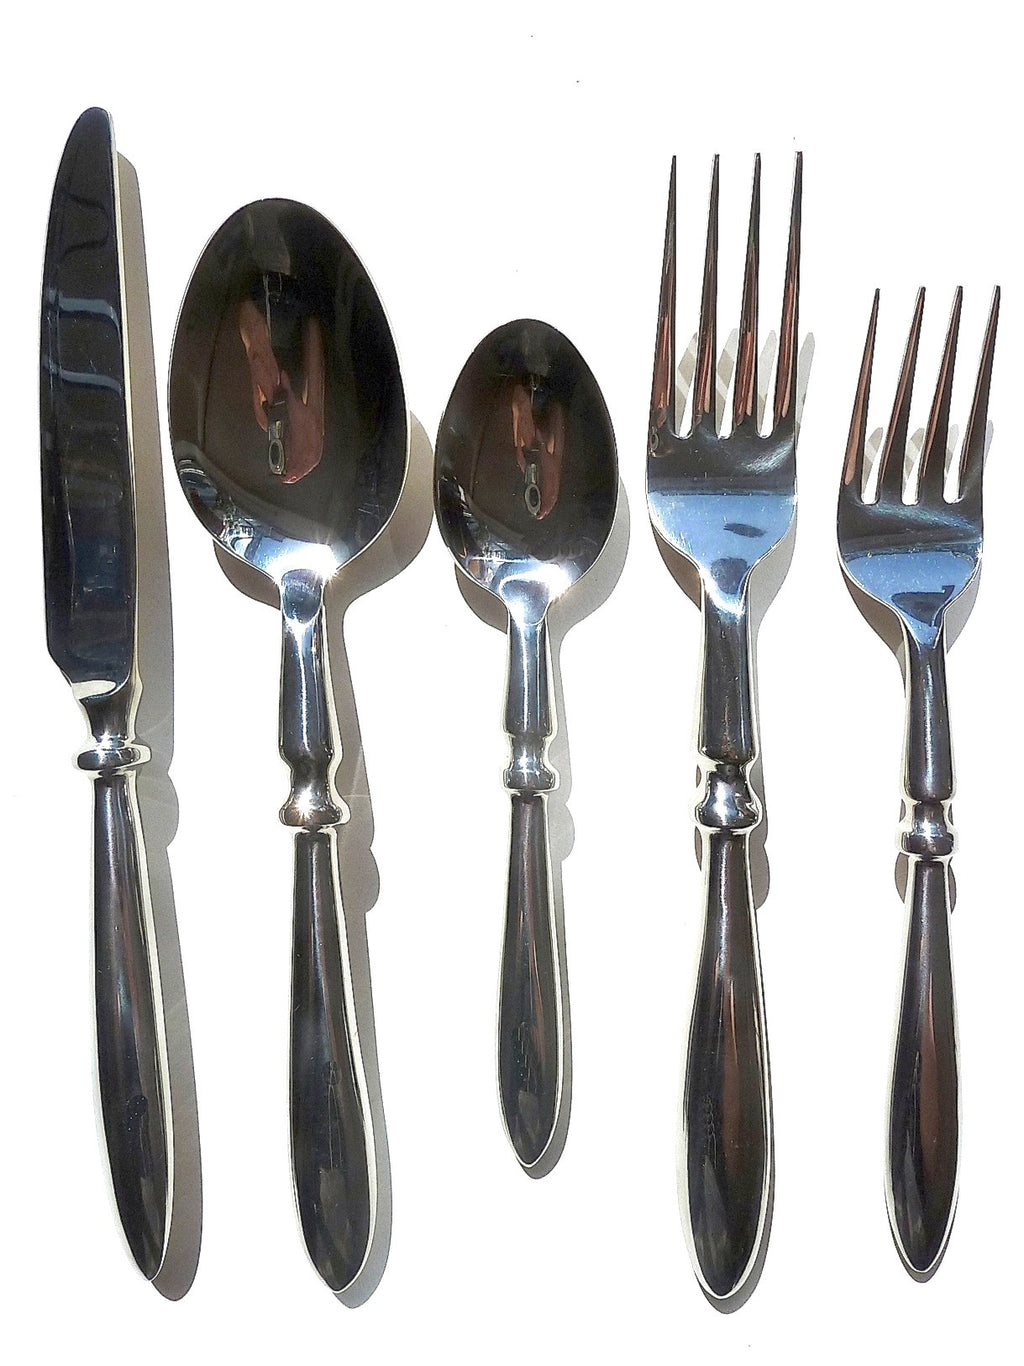 Stainless Steel Tudor Design 5 Piece Place Setting